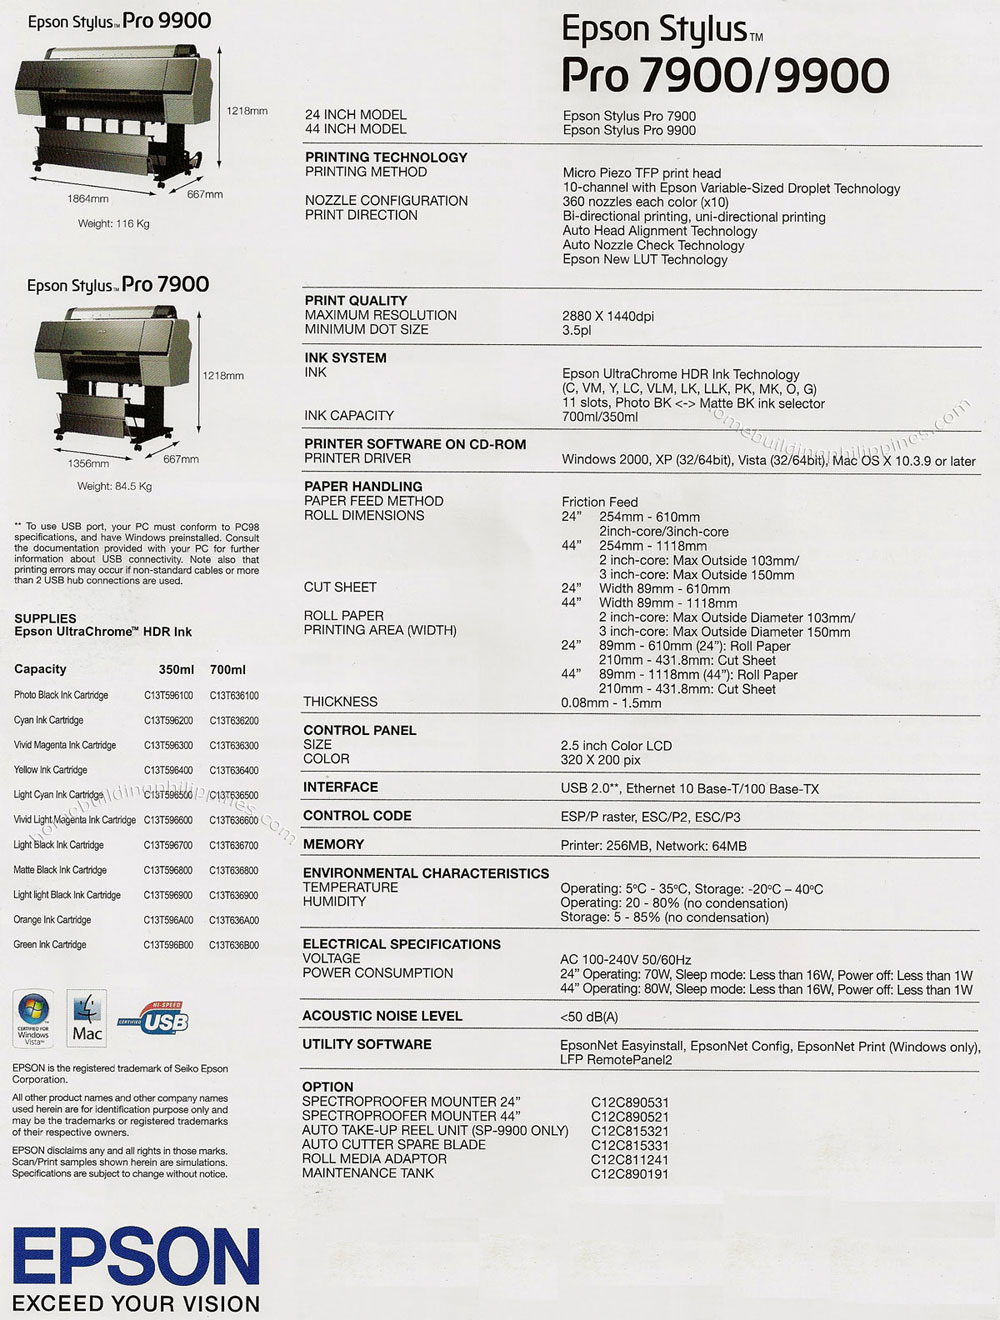 Epson 7900/9900 Large Format Printer Specifications